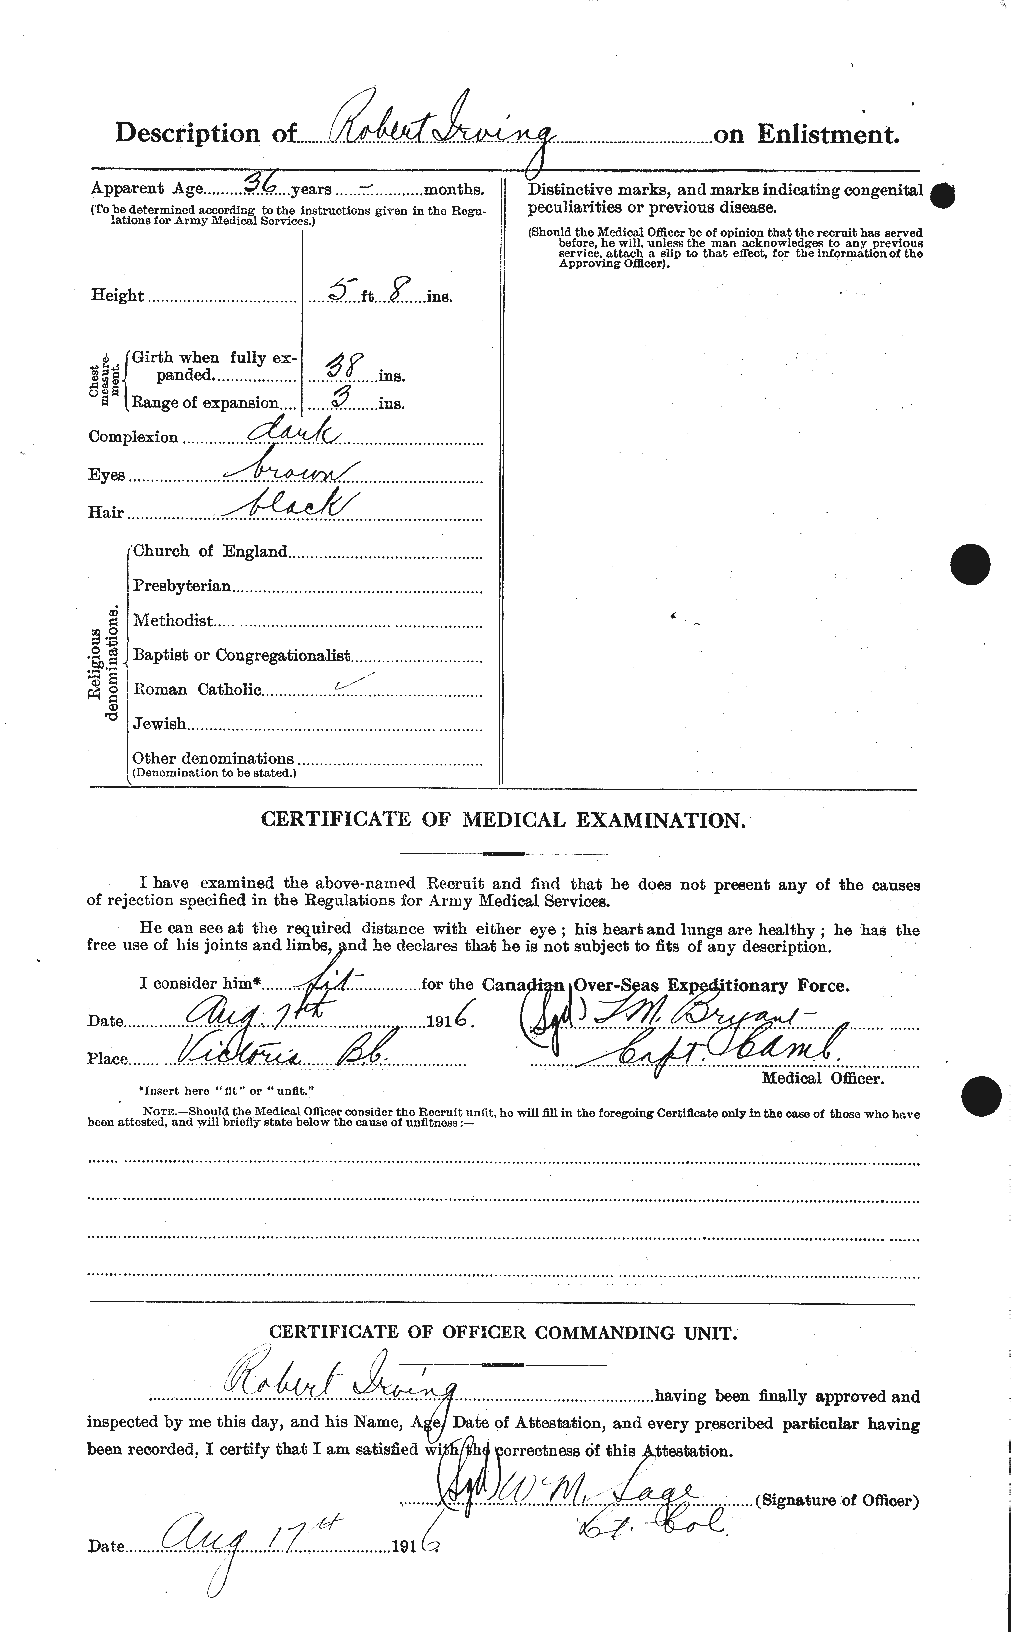 Personnel Records of the First World War - CEF 412709b